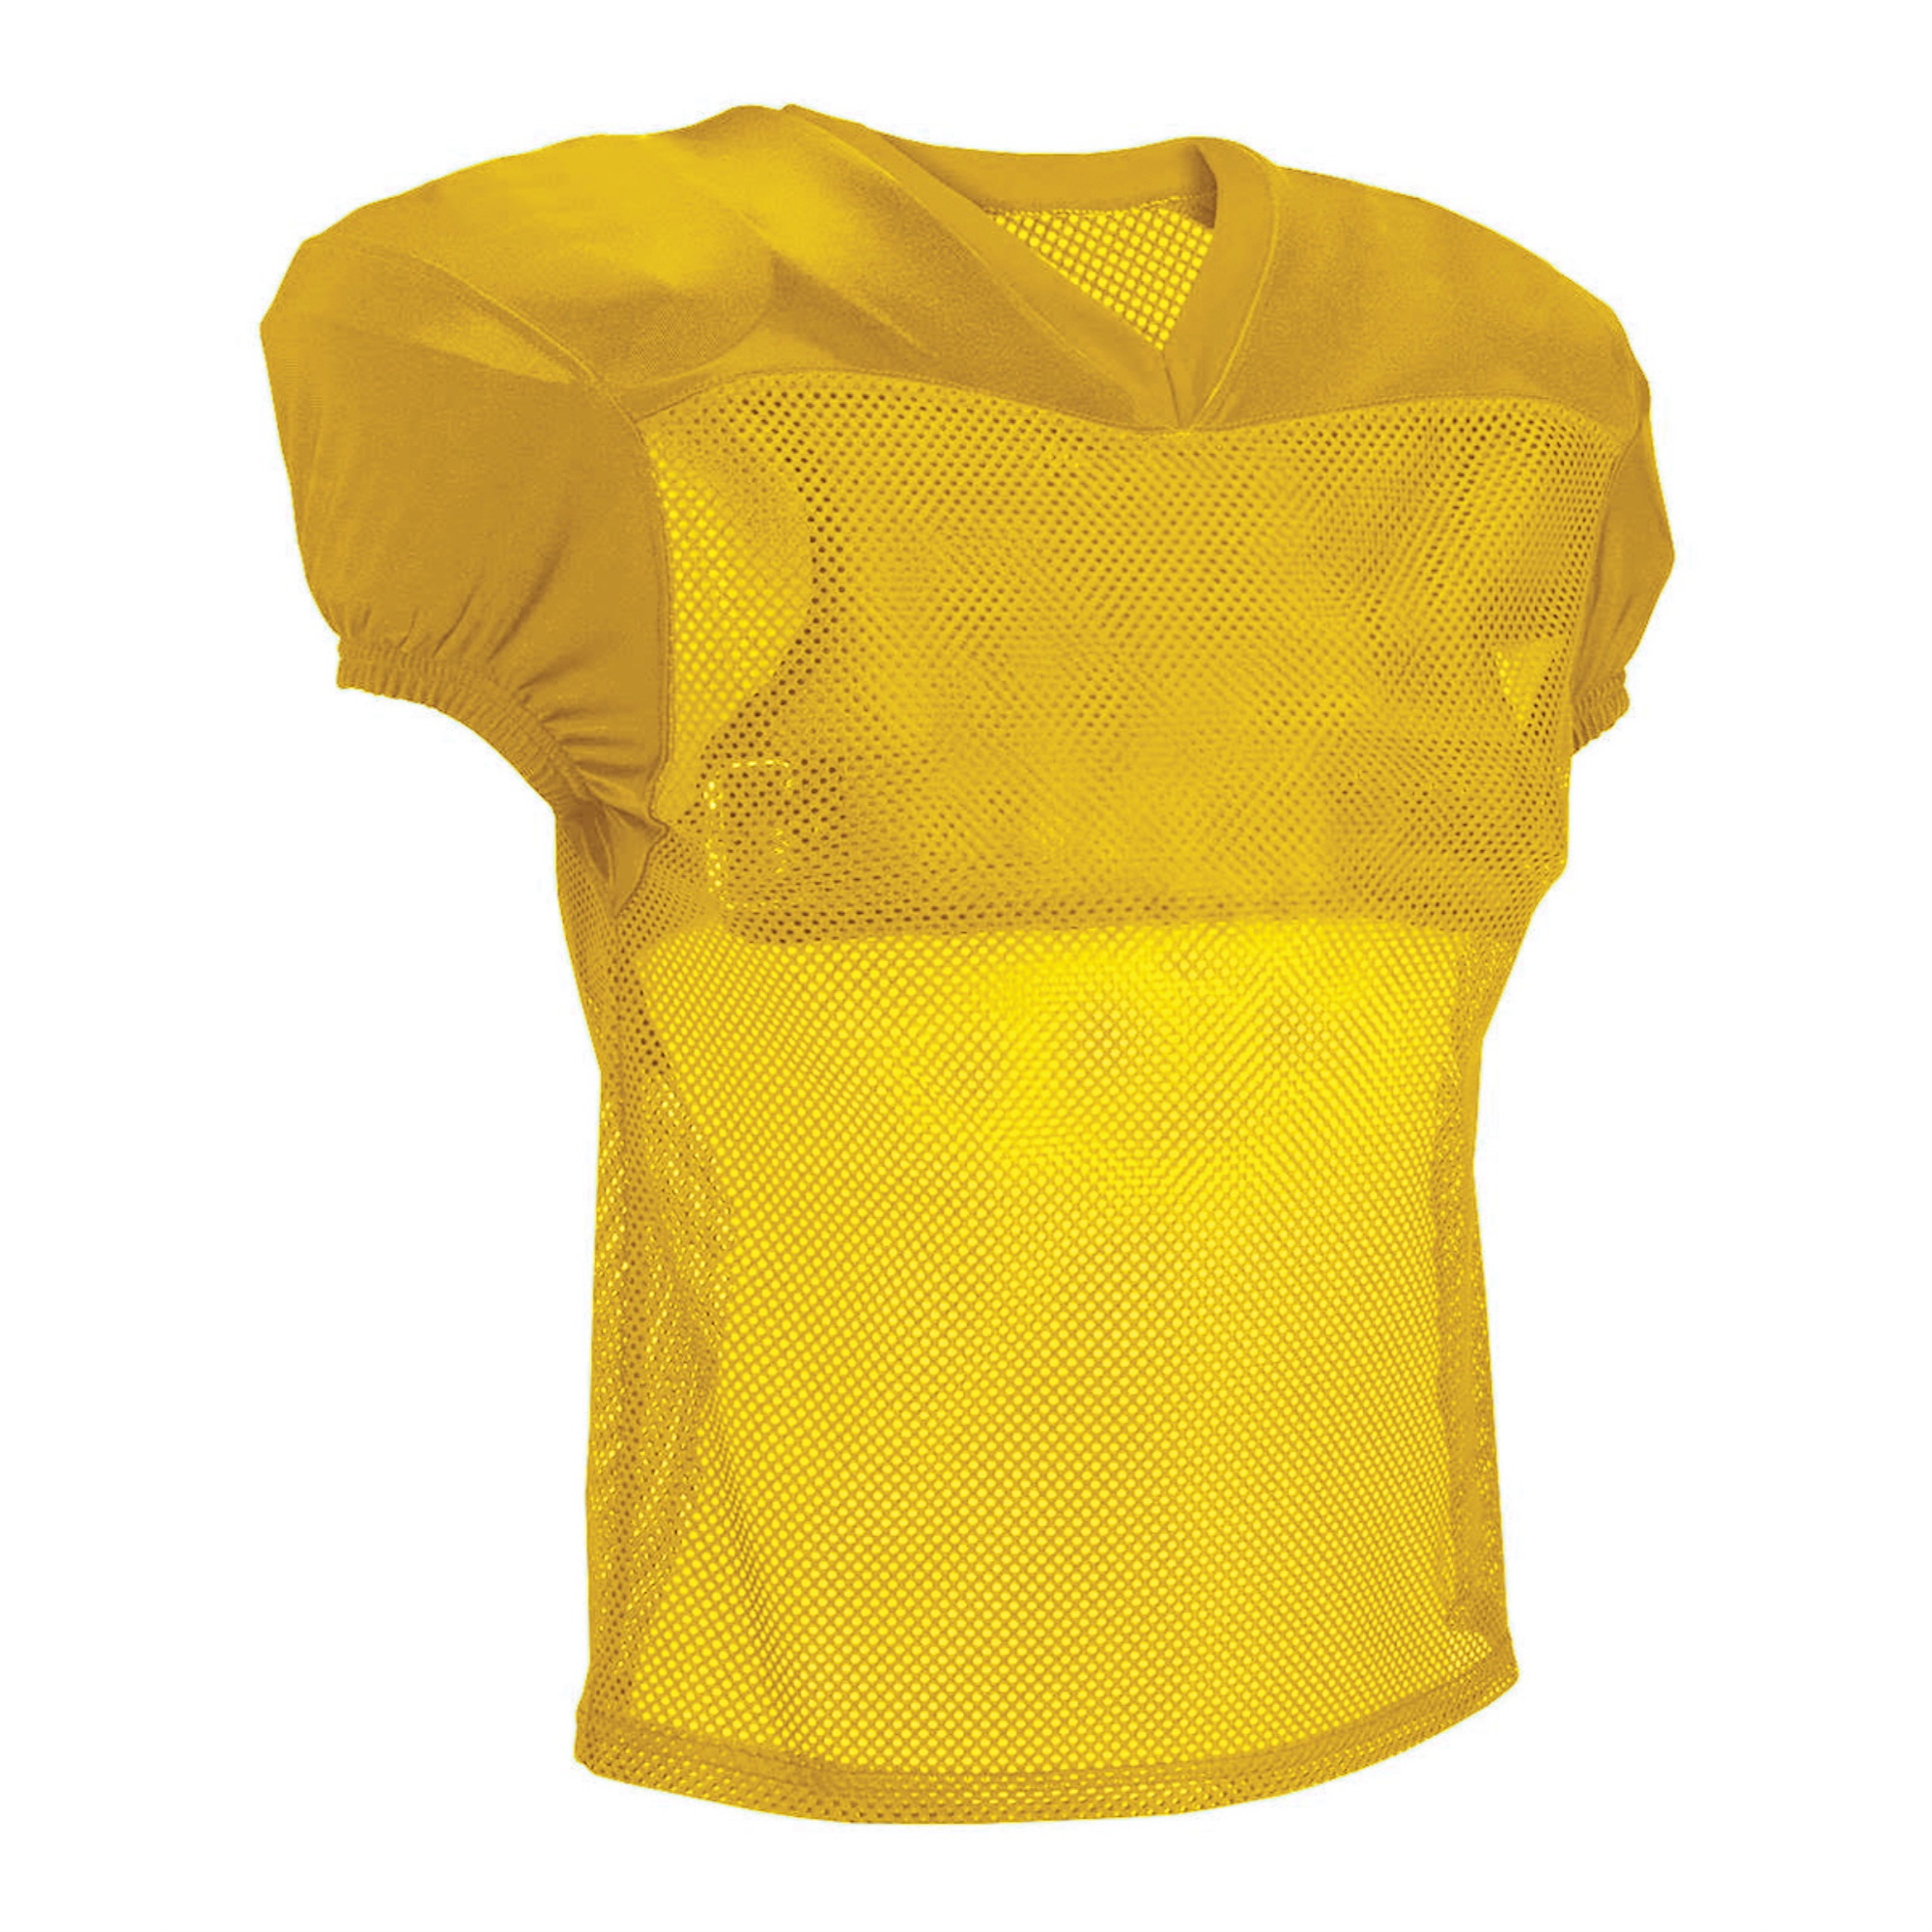 Martin Sports ADULT PRACTICE JERSEY-GOLD-S/M